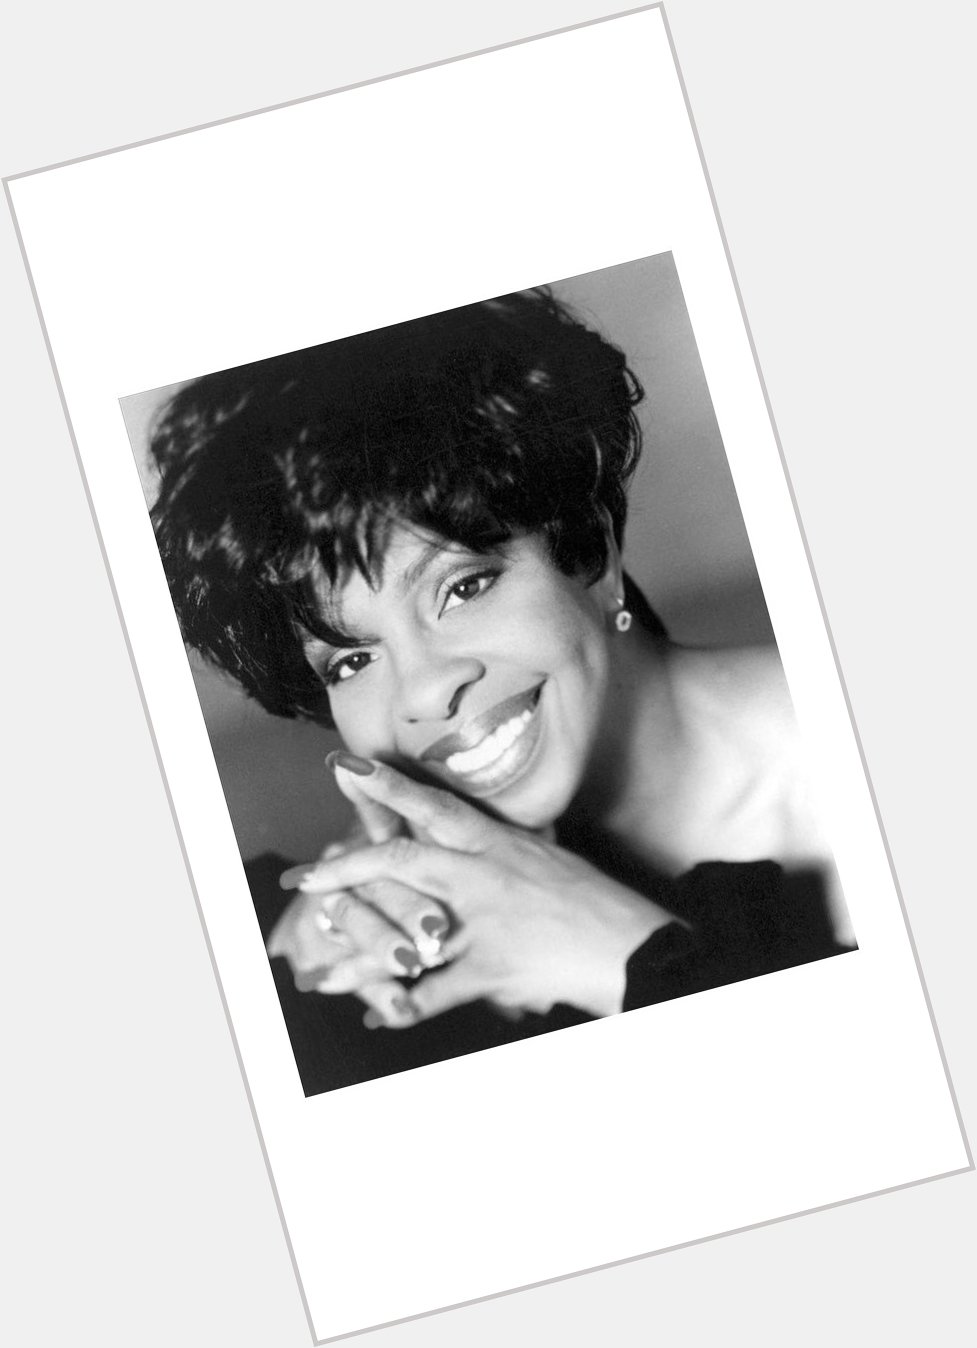 Wishing a very happy birthday to Motown songstress and female music icon, Gladys Knight.   